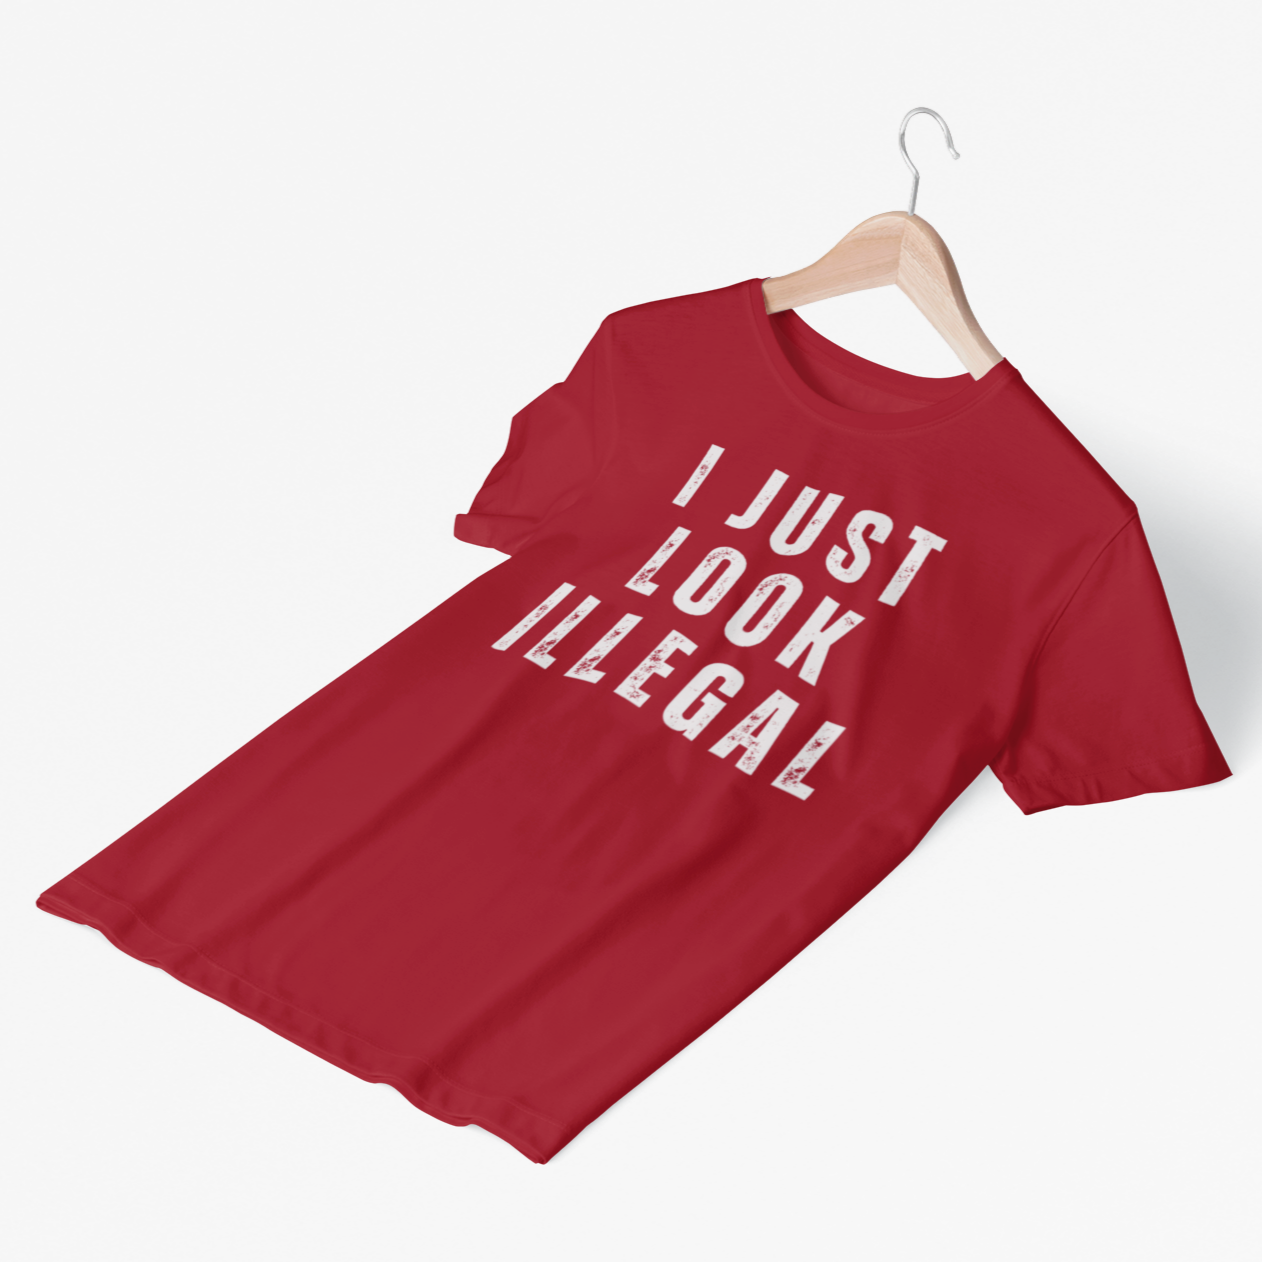 Funny red t-shirt with 'I Just Look Illegal' graphic in Latino Streetwear-style